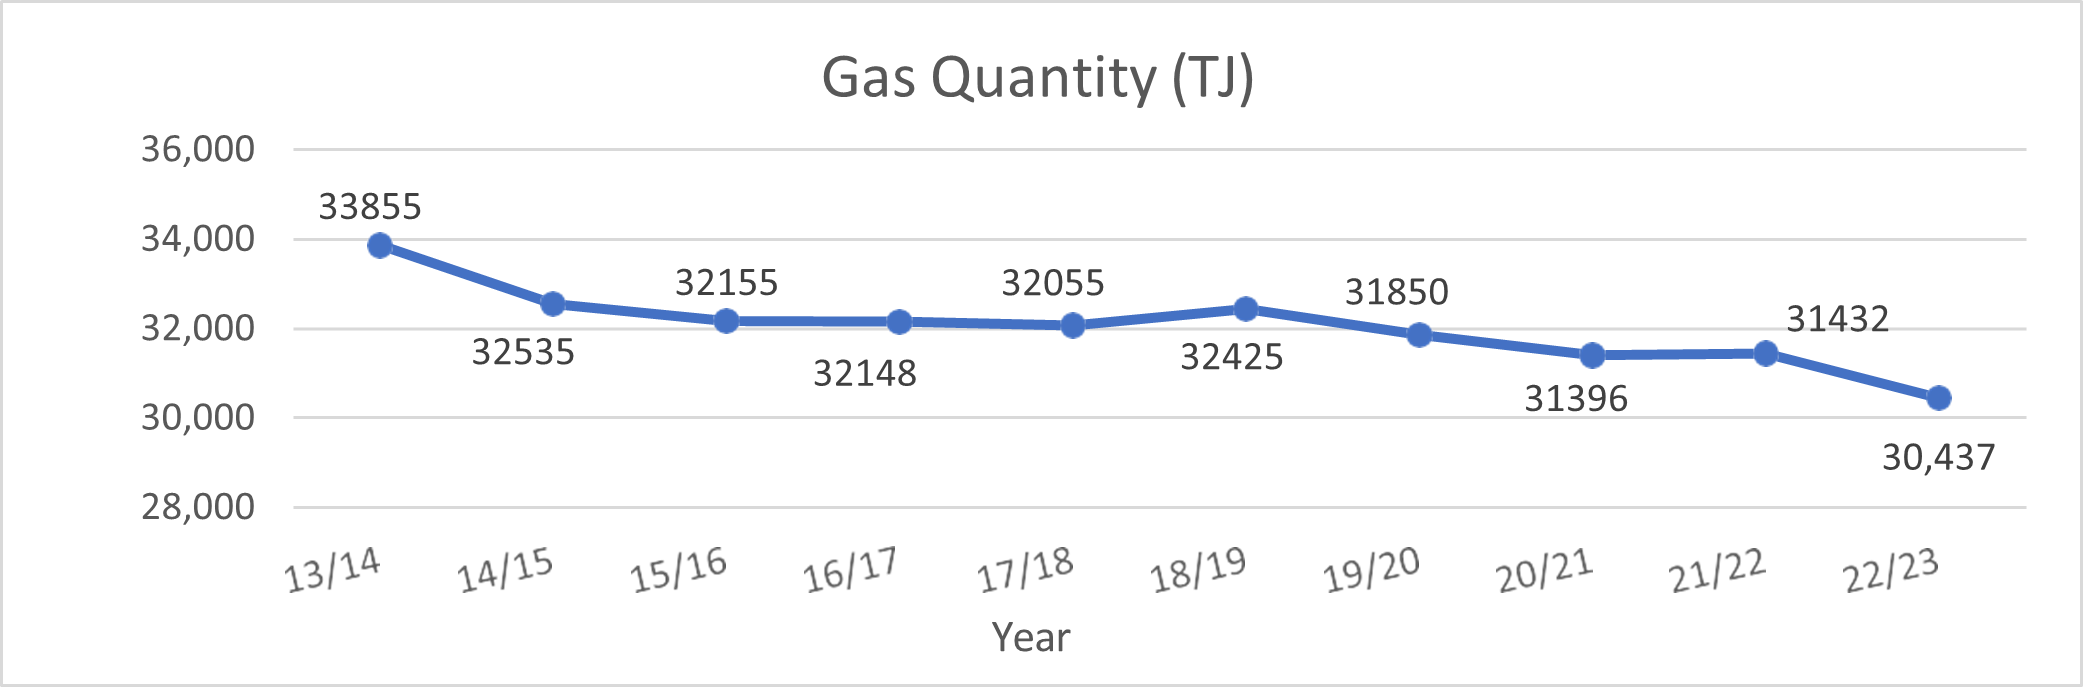 A chart showing the quantity of gas entering the distribution system over the last 10 years. It shows that the overall amount of gas supplied to the networks was 31396 in 2020 to  2021, 31432 in 2021 to 2022, and 30,437 in 2022 to 2023.